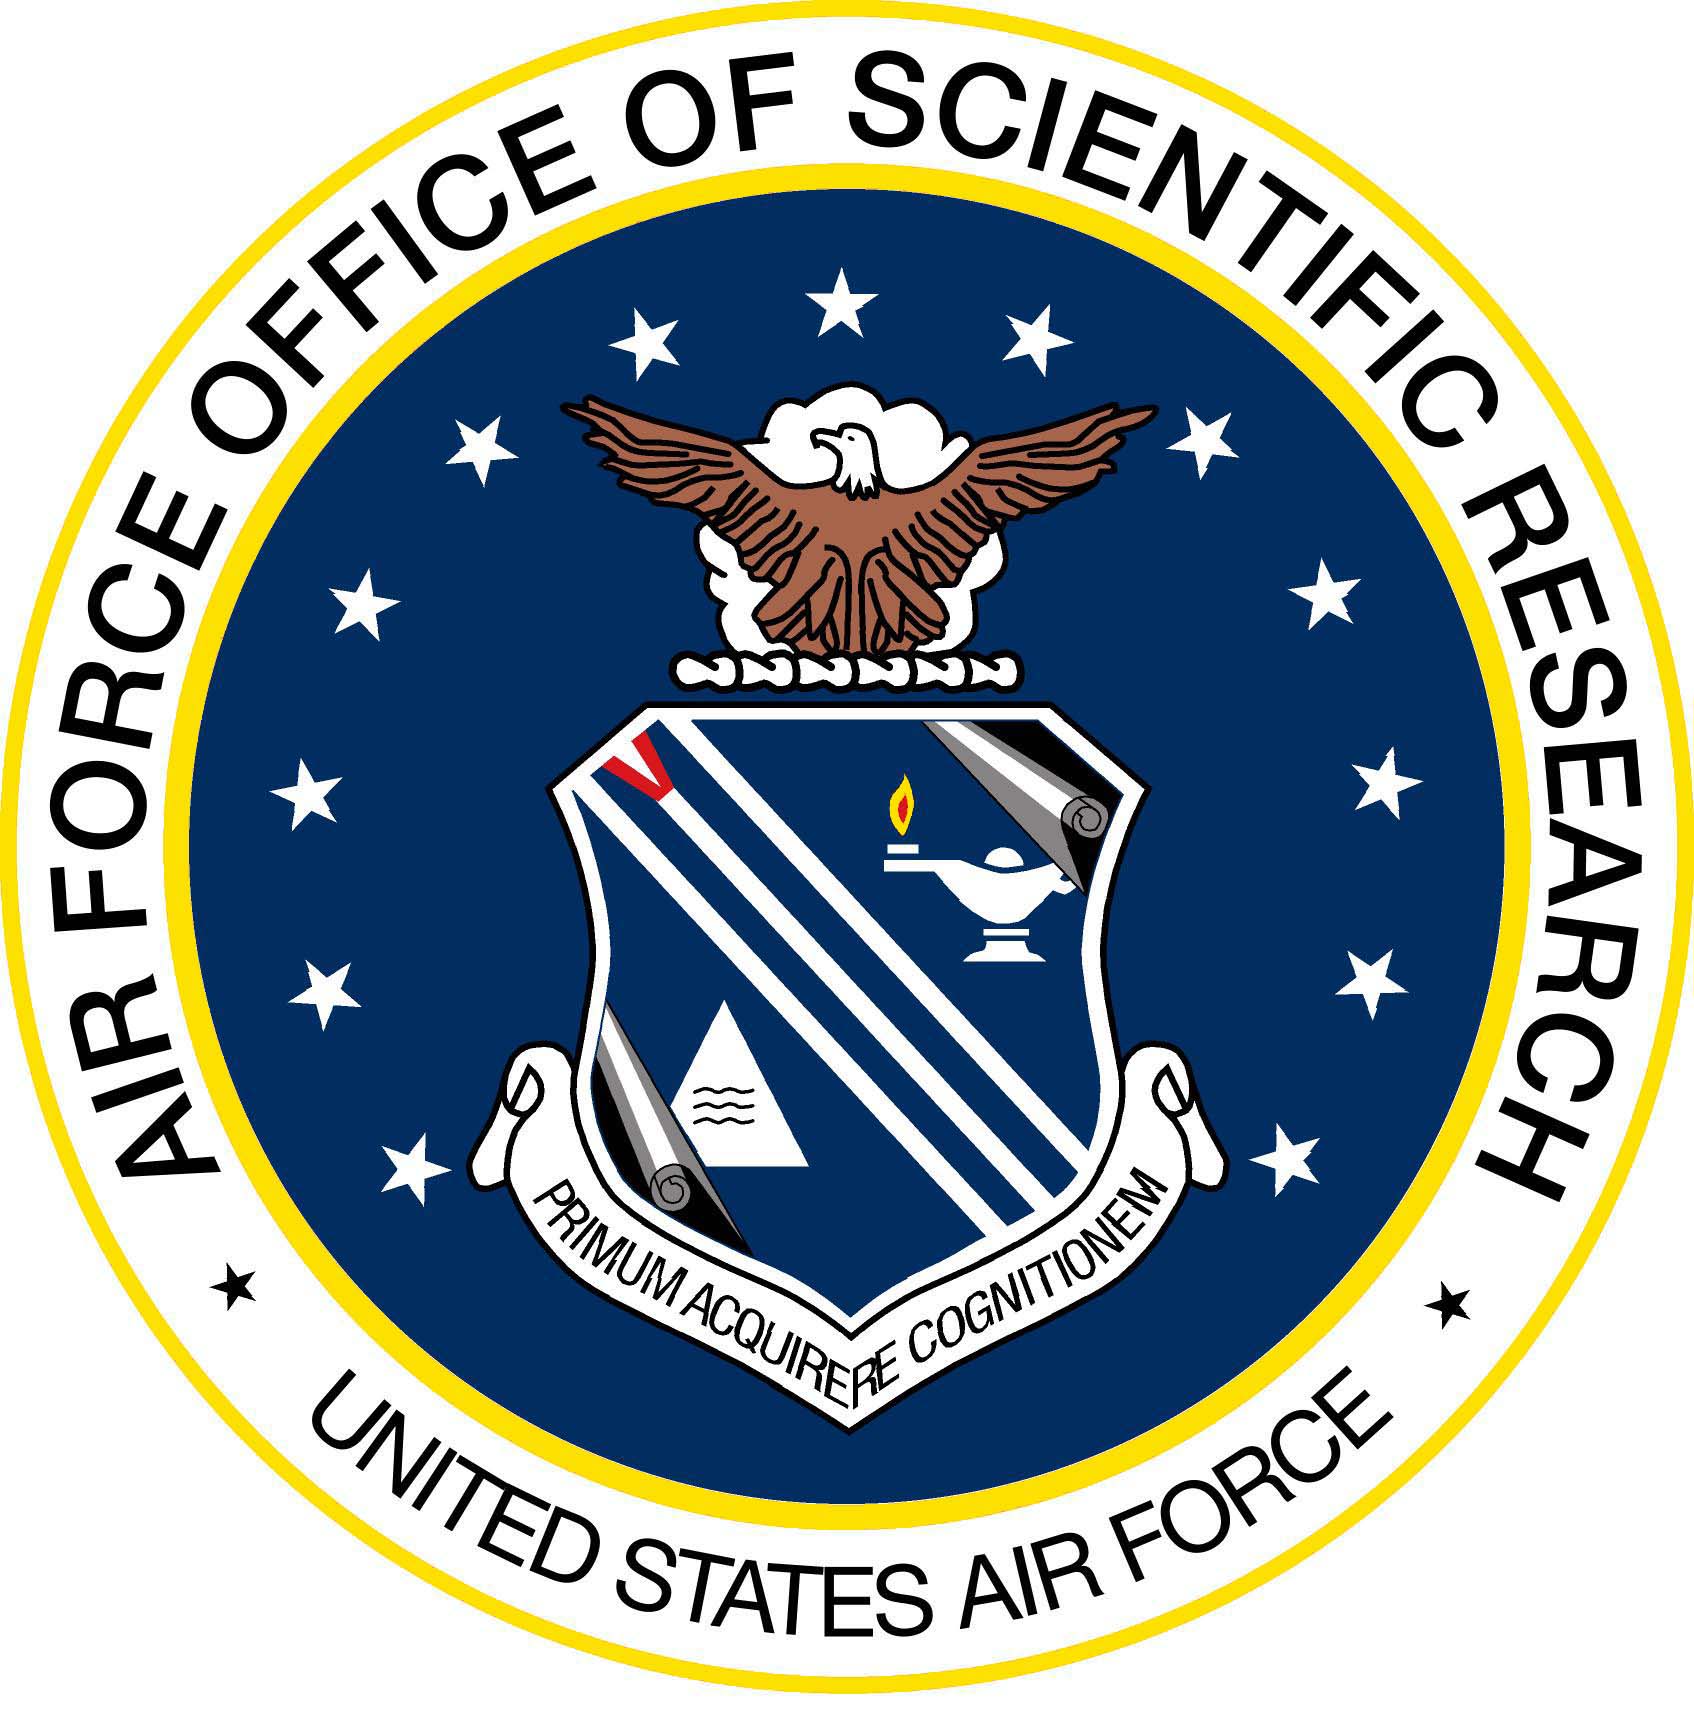 Airforce Office of Scientific Research